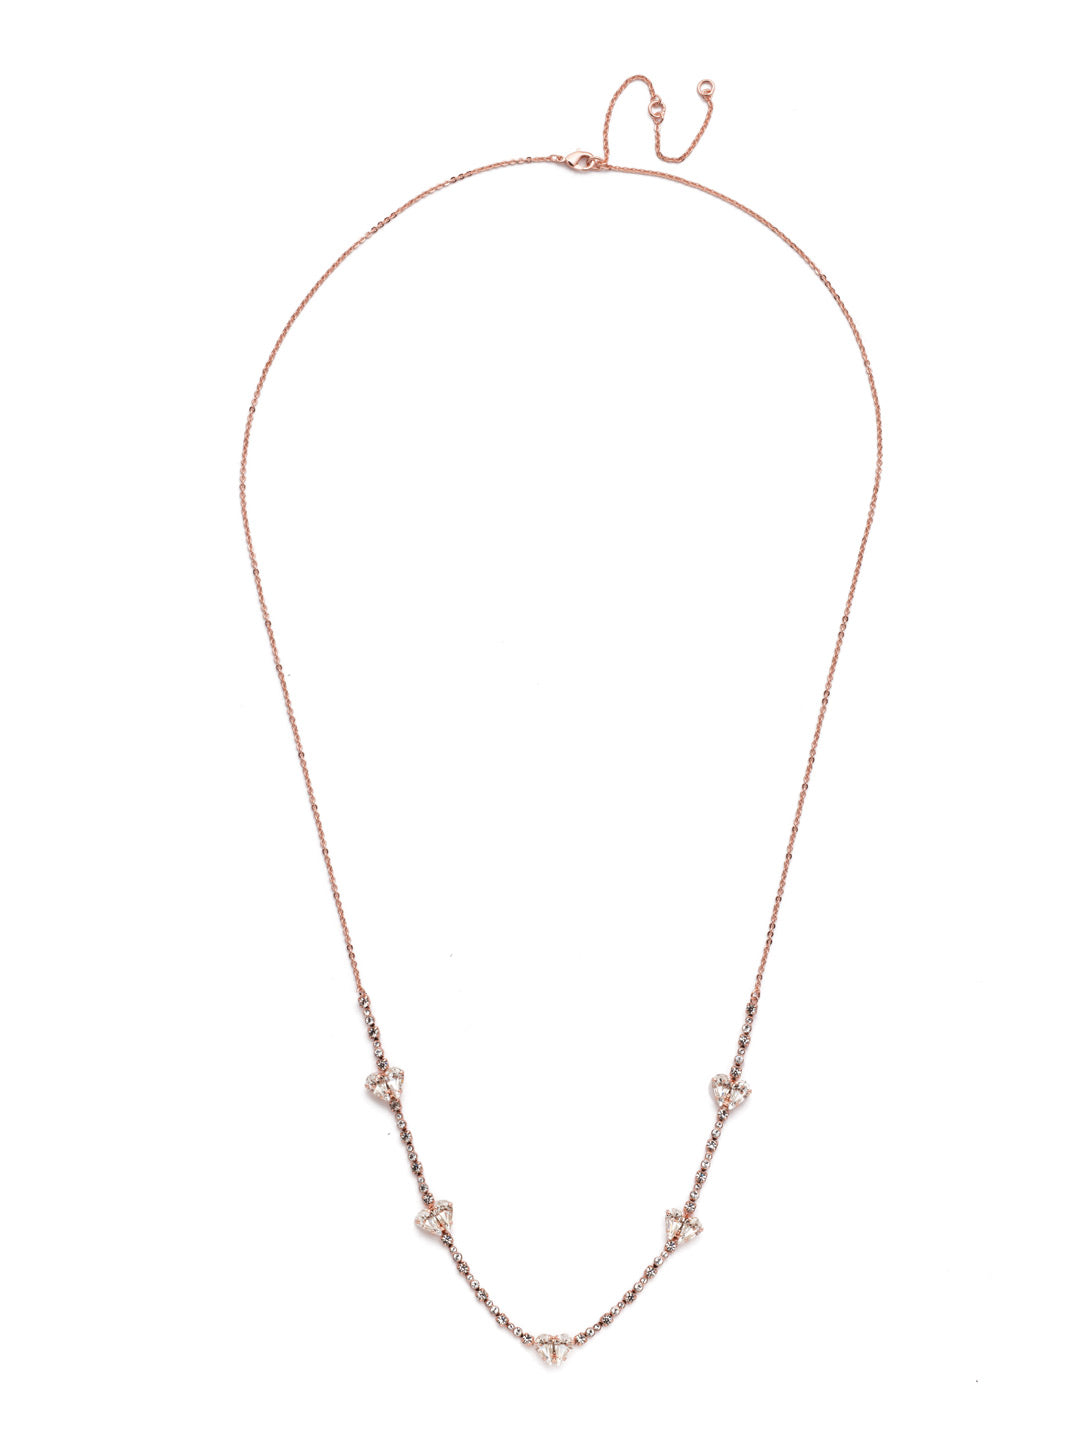 Petra Long Necklace - NER11RGCRY